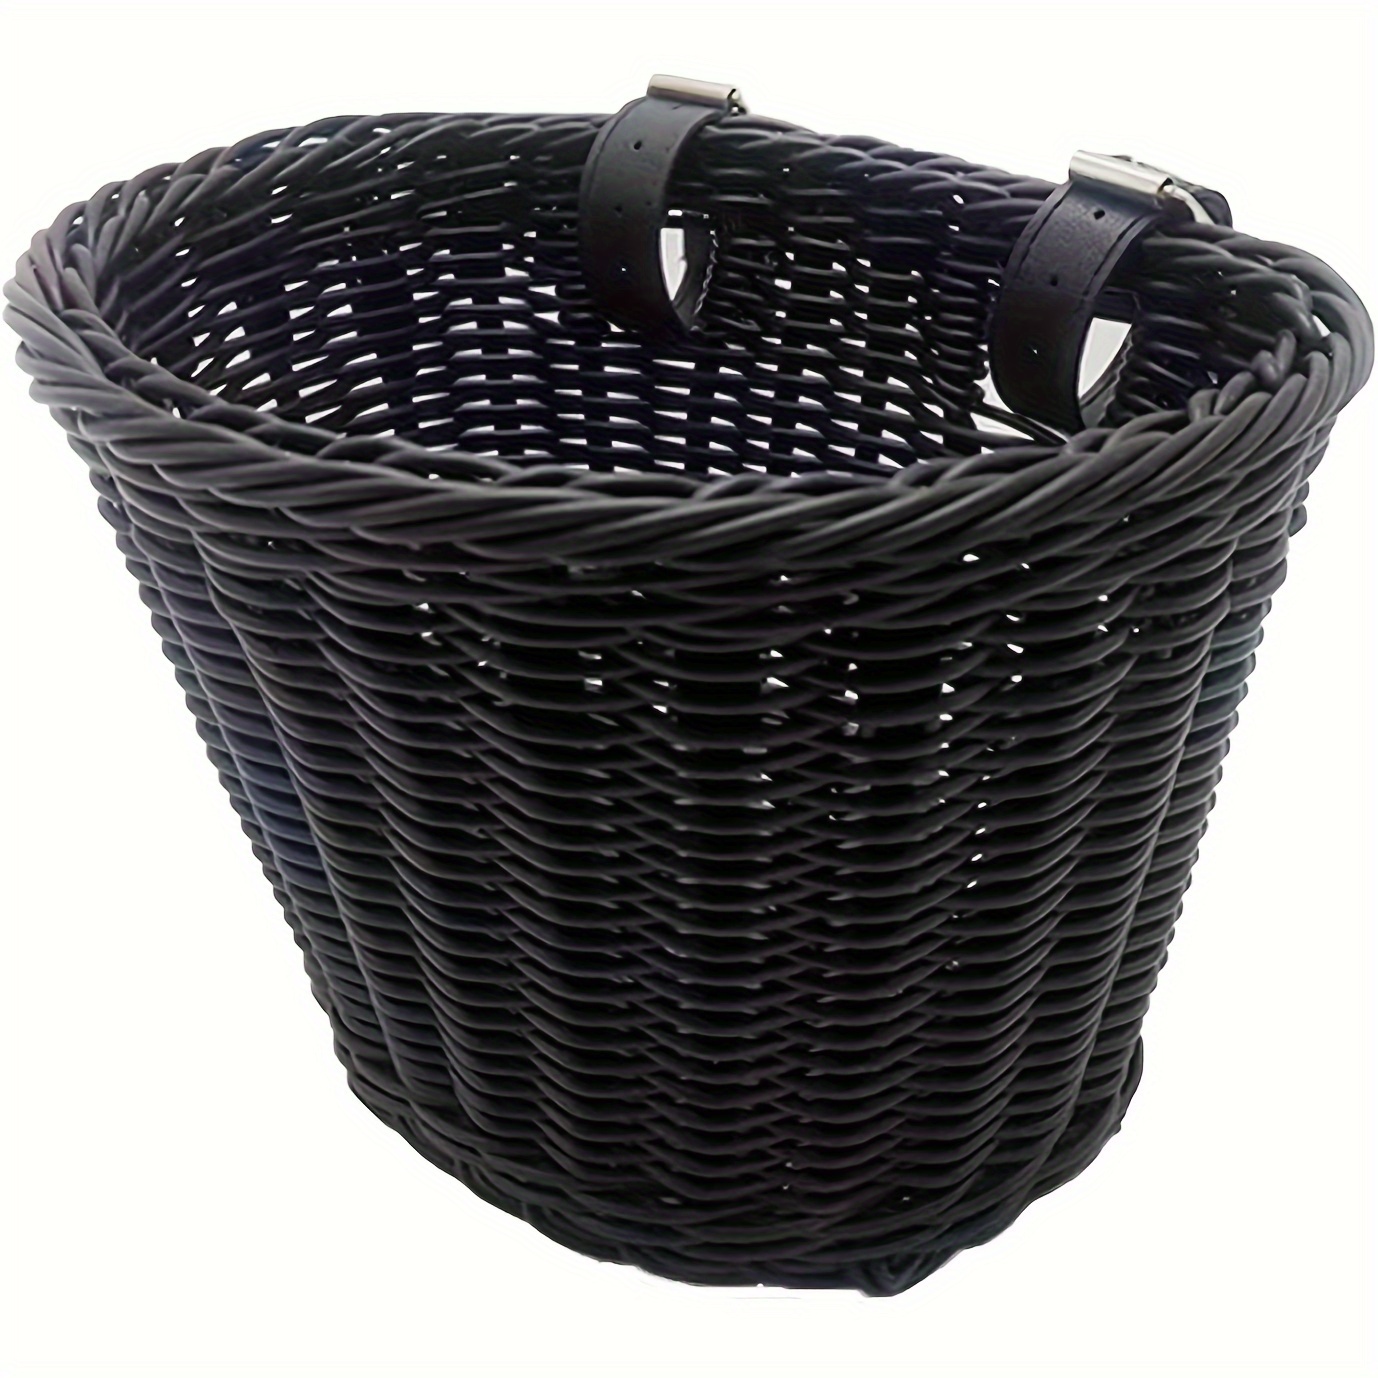 

1pc Woven Basket For Bike, Balance Bike & Scooter, Black, With Faux Leather Straps, Rustic Charm, Durable Storage Carrier